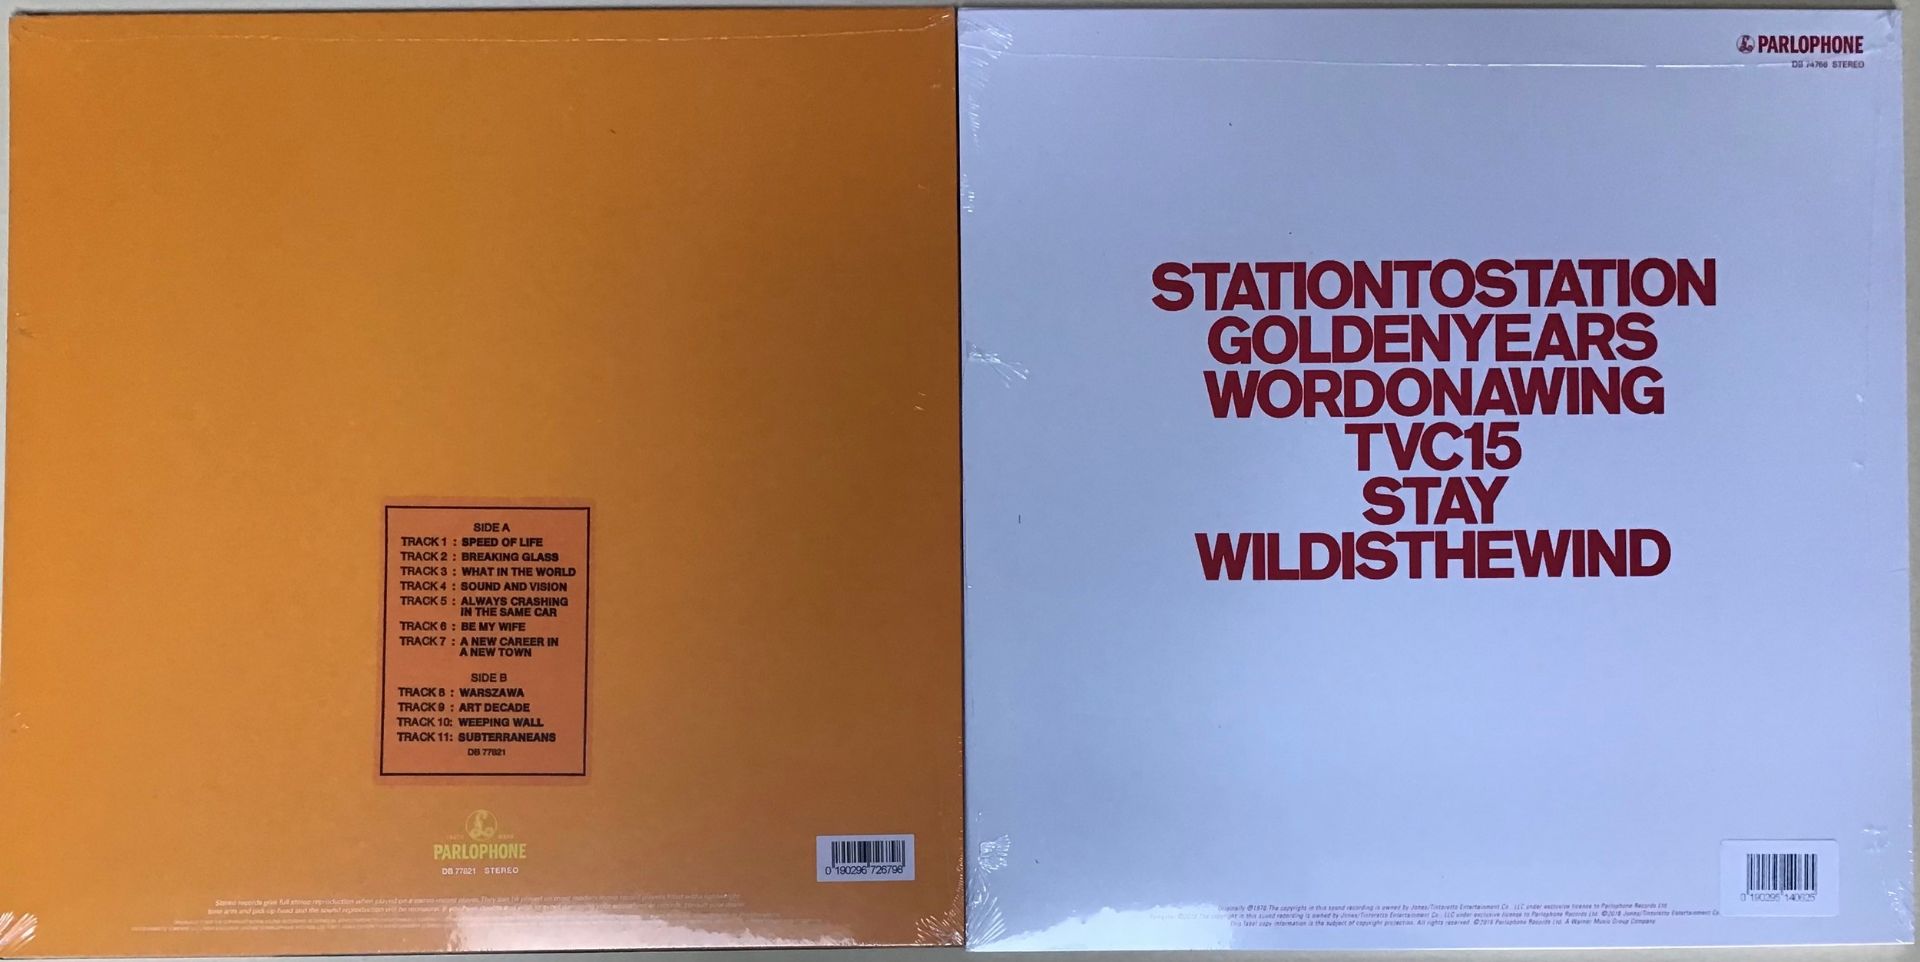 DAVID BOWIE LP RECORDS 'LOW & STATION TO STATION' LIMITED COLORED EDITION'S. Both albums here come - Image 2 of 2